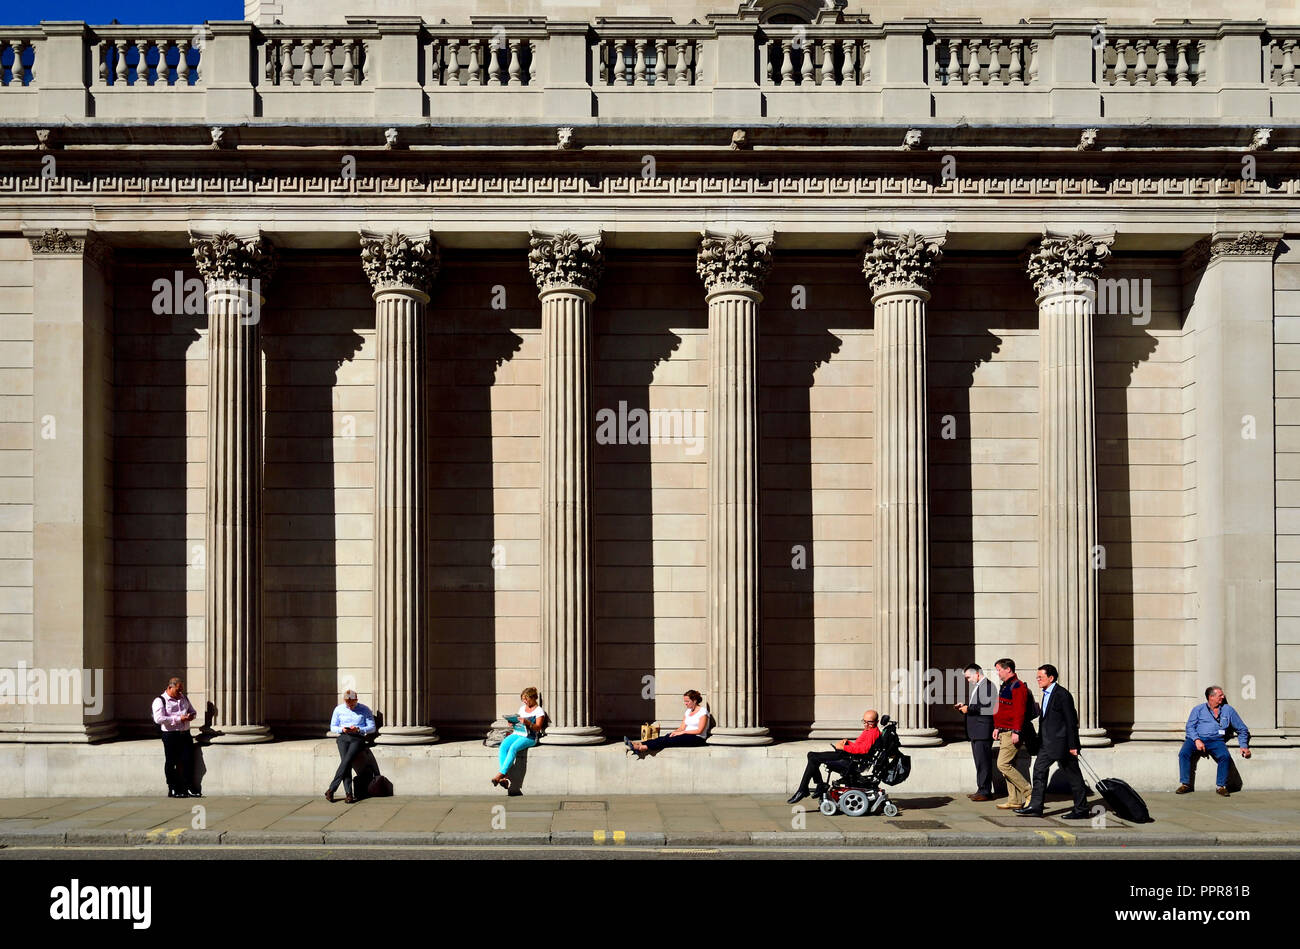 People sitting on the southern facade of the Bank of England, London, England, UK. Stock Photo